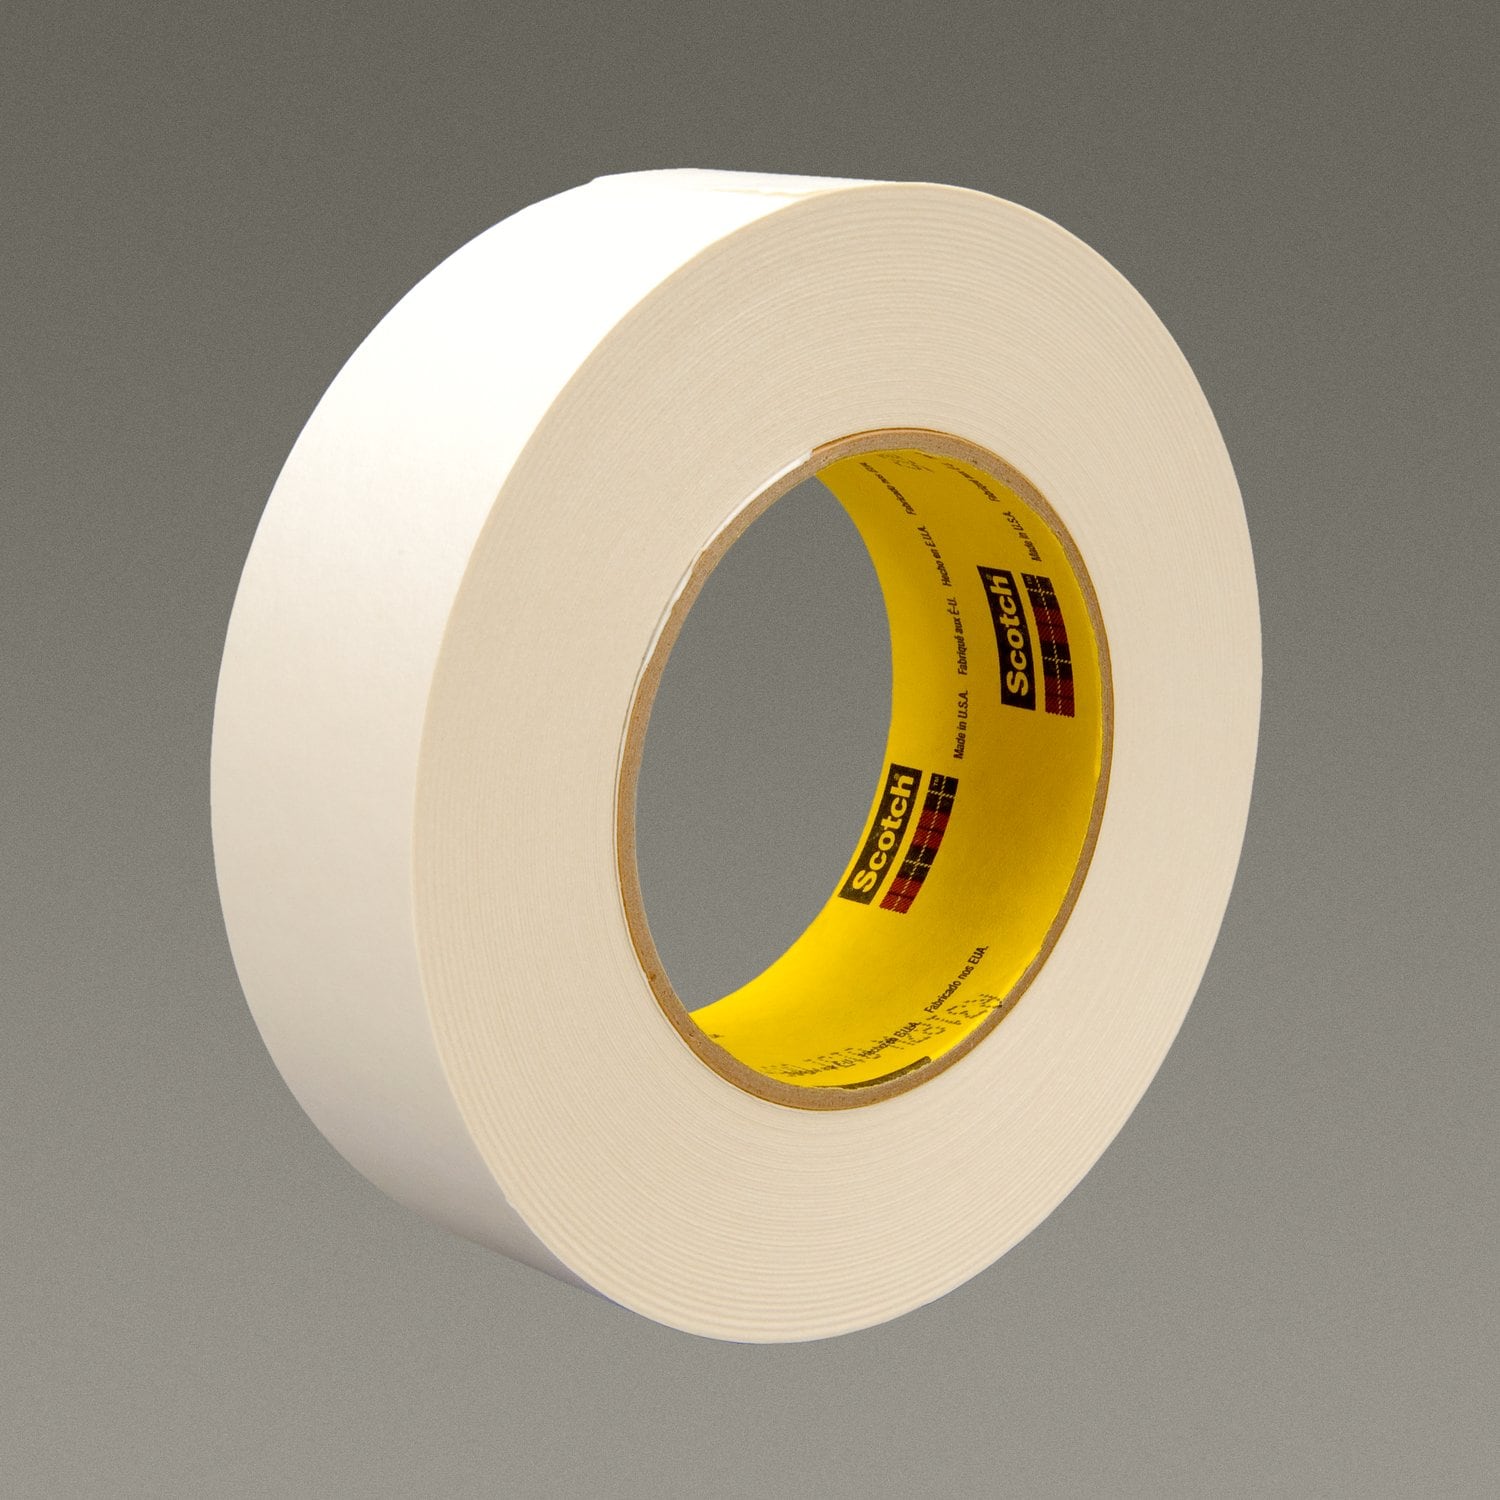 7100012190 - 3M Repulpable Strong Single Coated Tape R3187, White, 7.5 mil, Roll,
Config